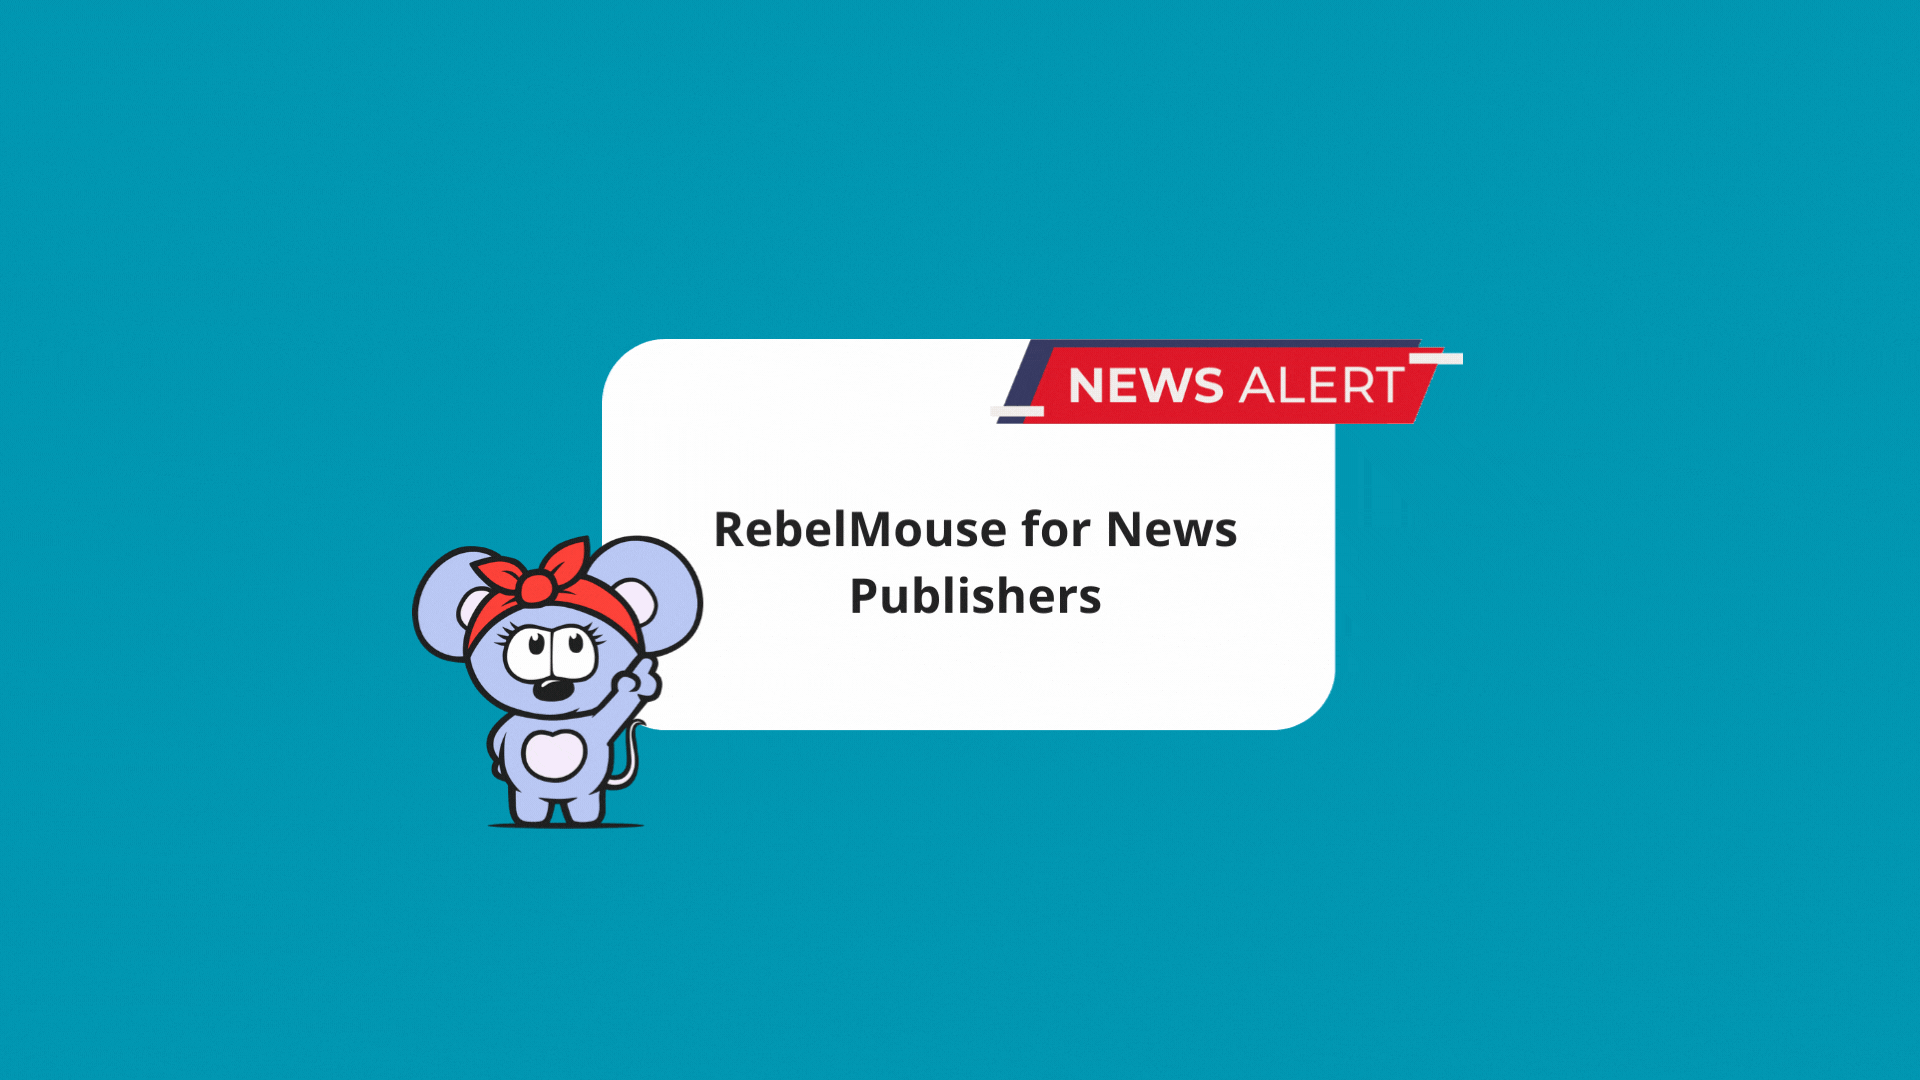 RebelMouse logo with red headband pointing to RebelMouse for News Publishers title